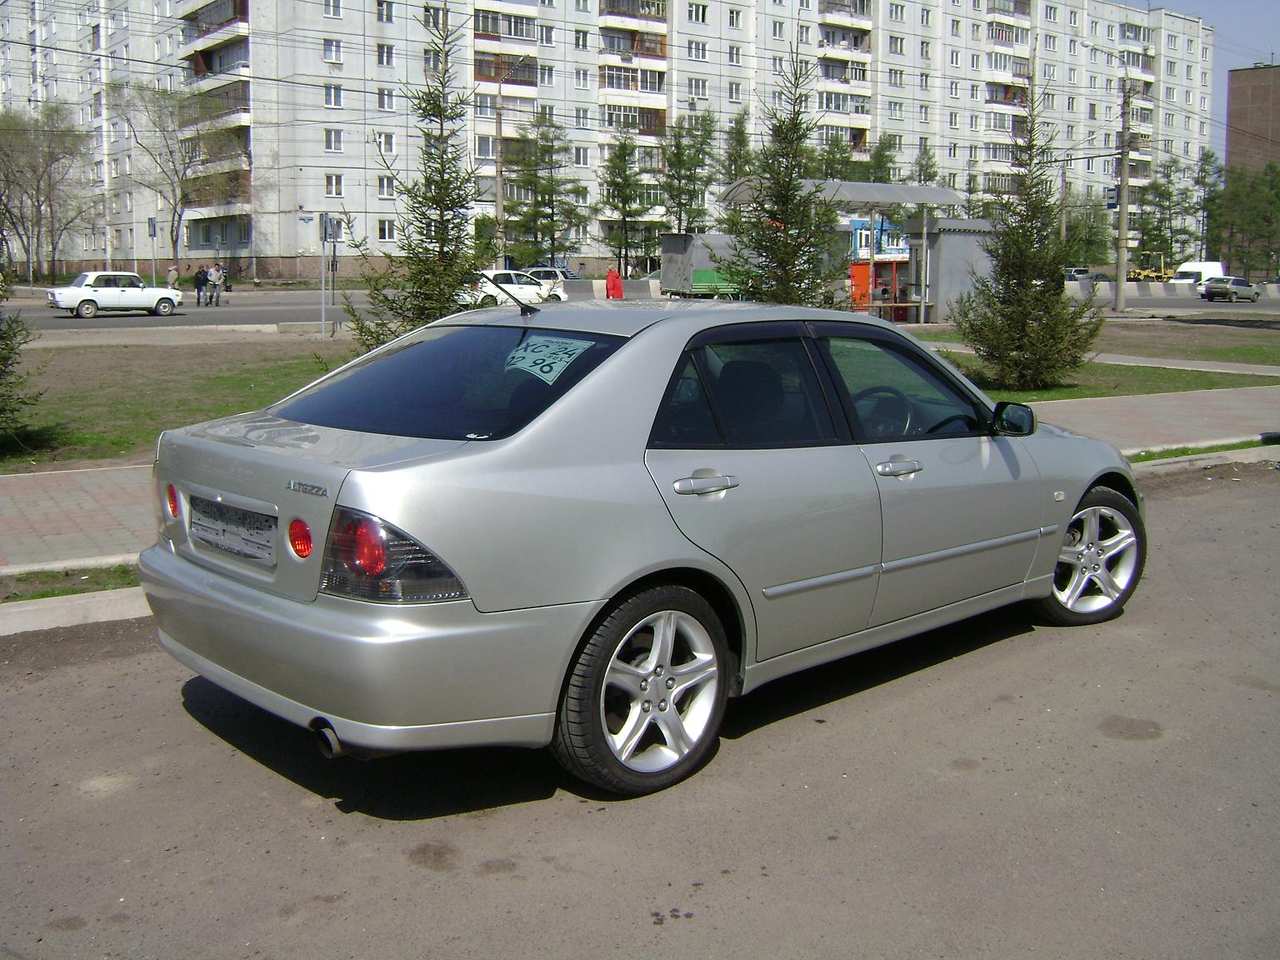 Used toyota altezza 2004 model for sale in japan